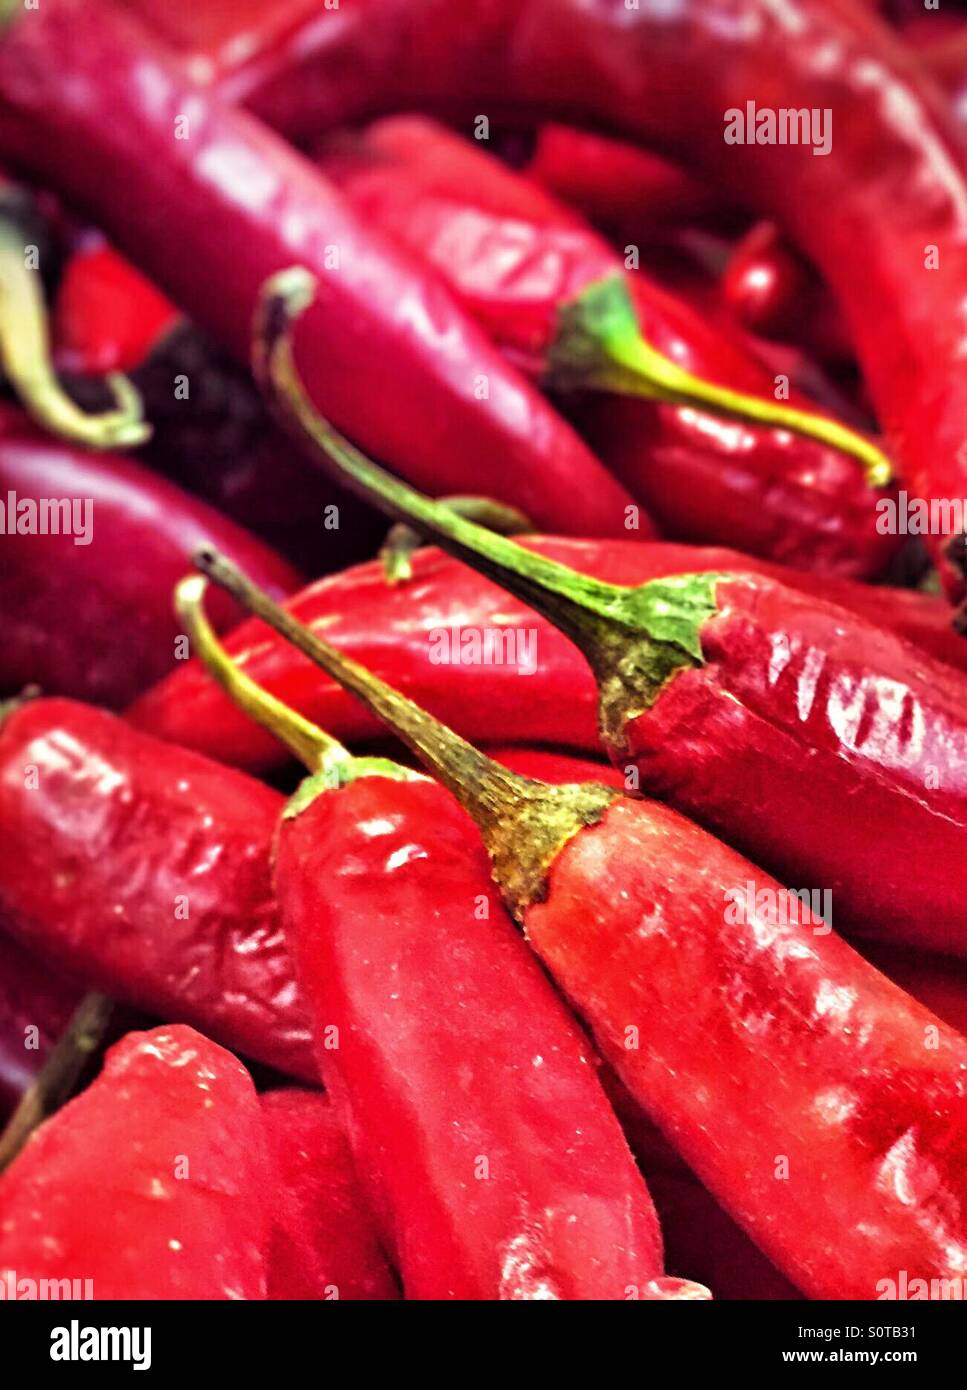 Chilies displayed at a groceries shops Stock Photo